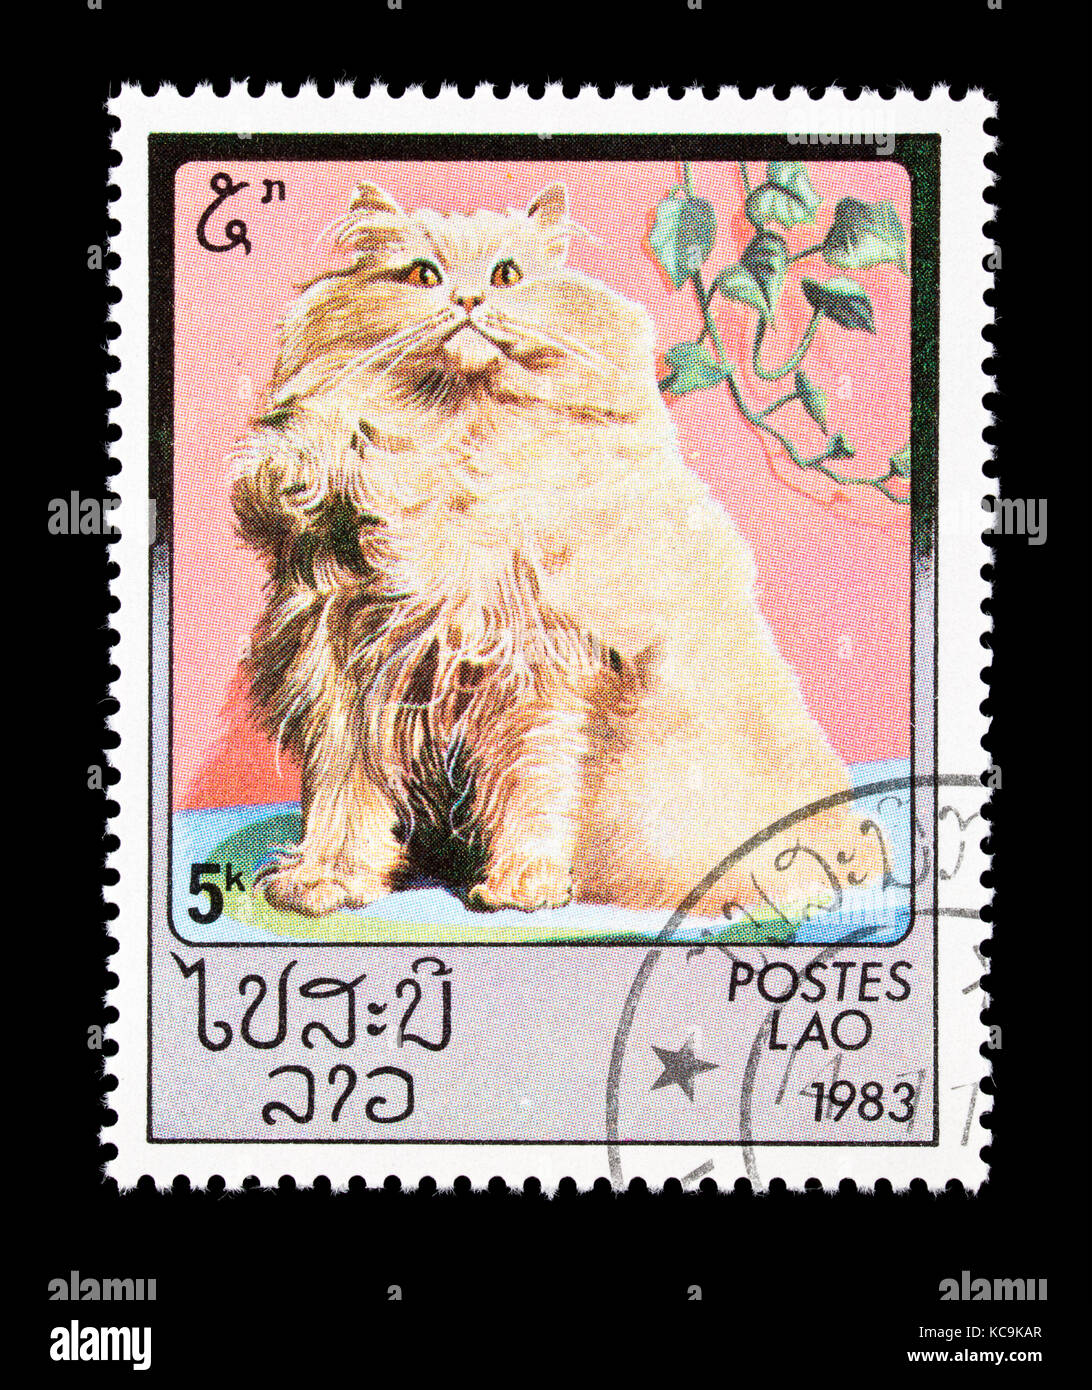 Postage stamp from Laos depicting a Persian cat Stock Photo